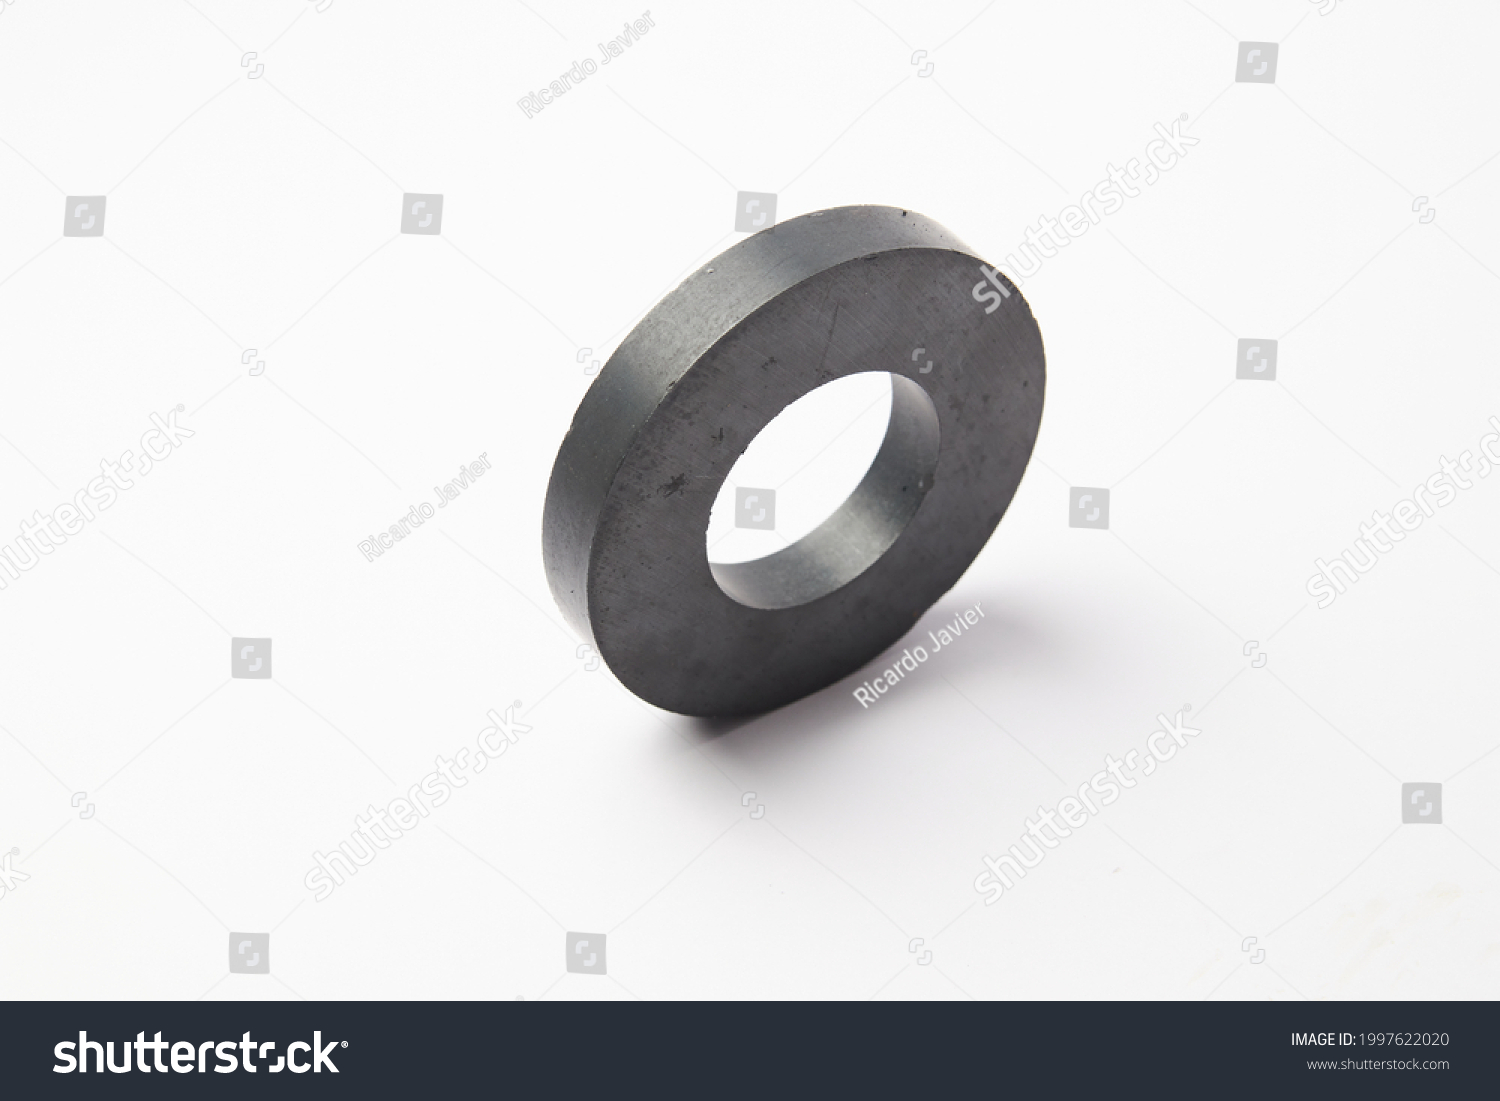 Circular black ferrite ring magnet isolated on a white background #1997622020